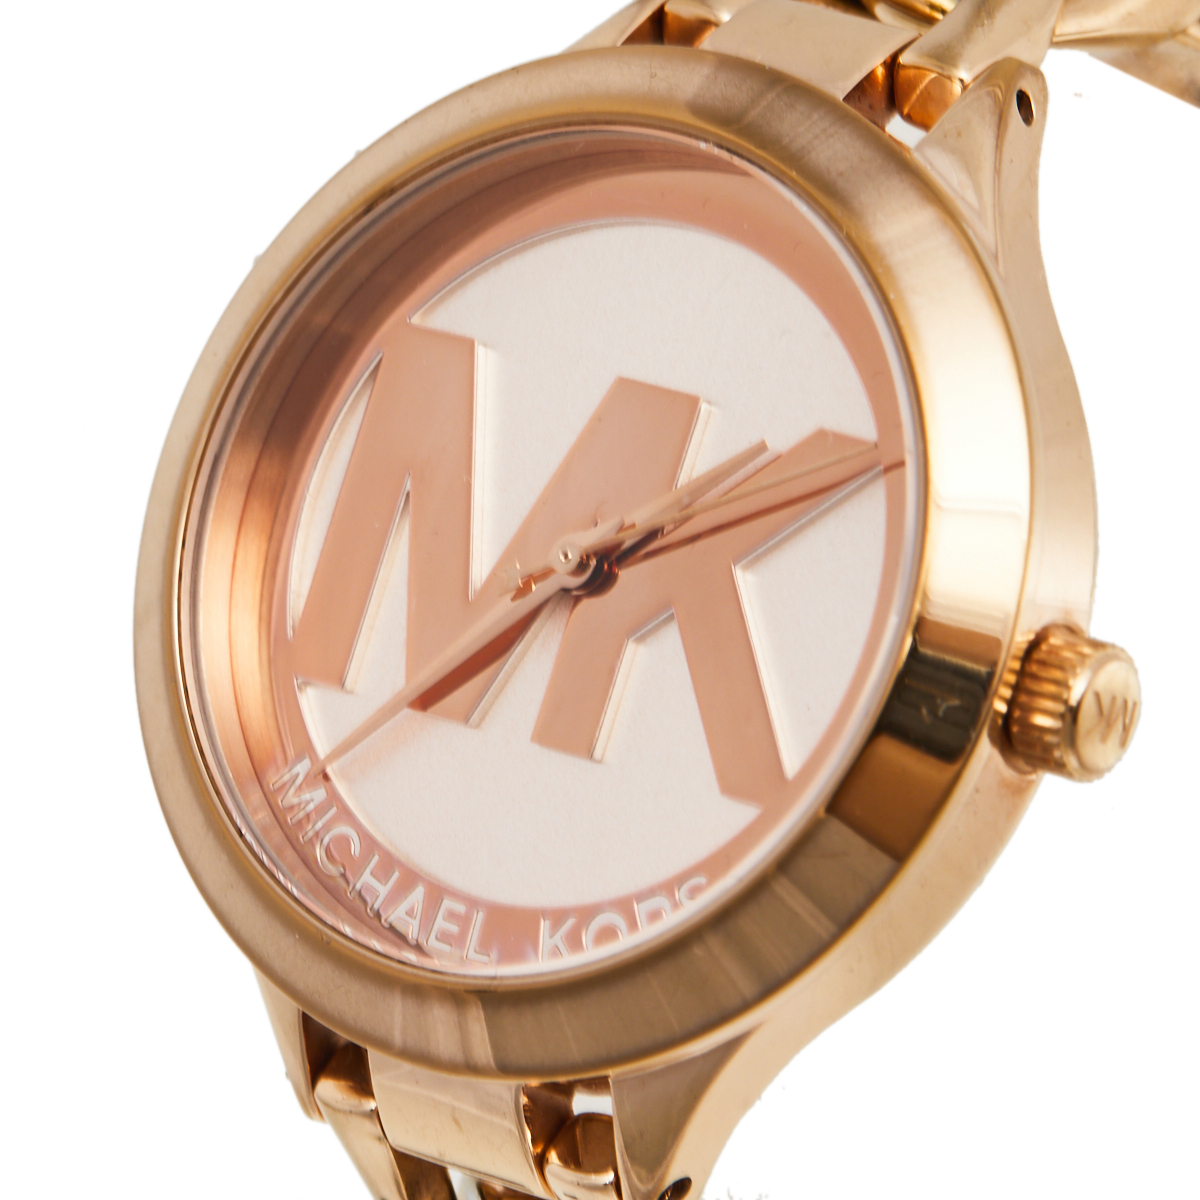 

Michael Kors Champagne Rose Gold Plated Stainless Steel Runway MK-3424 Women's Wristwatch